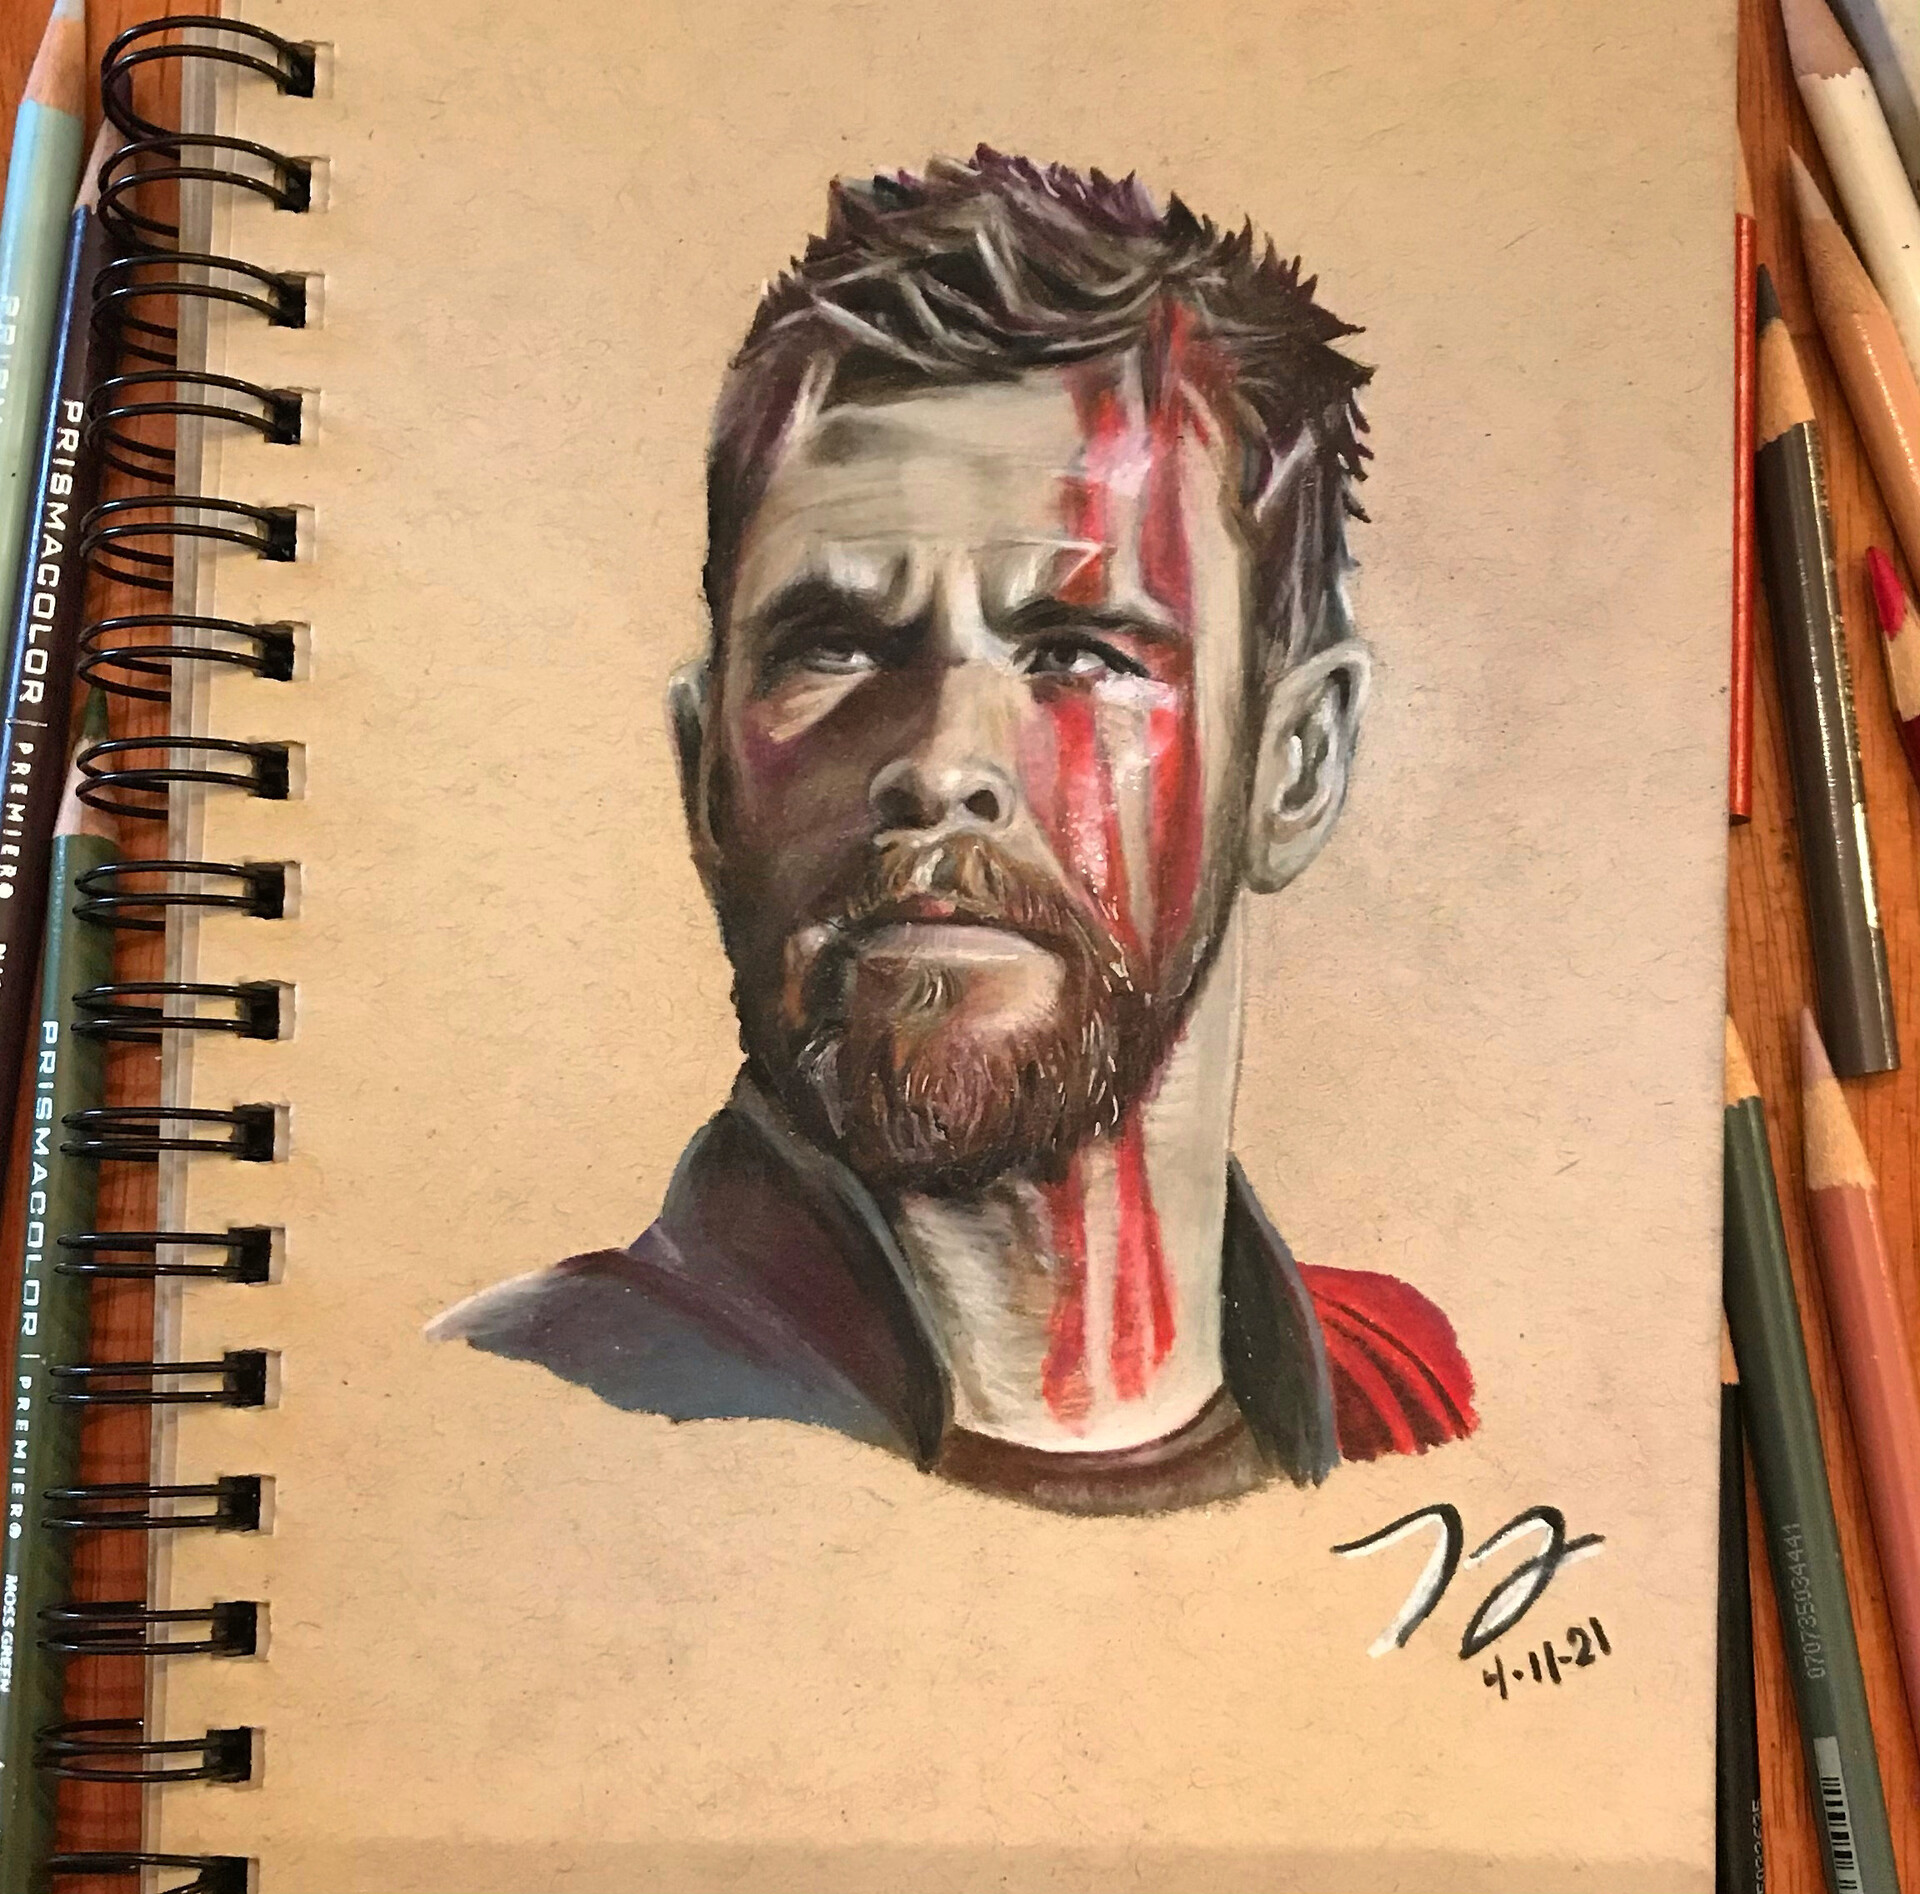 AbhiSketch - Pencil art of THOR / chris hemsworth from the upcoming movie  Thor Ragnarok... This artwork took 20 hours to complete with 2h,hb,4b and  6b pencil..so if u like my artwork